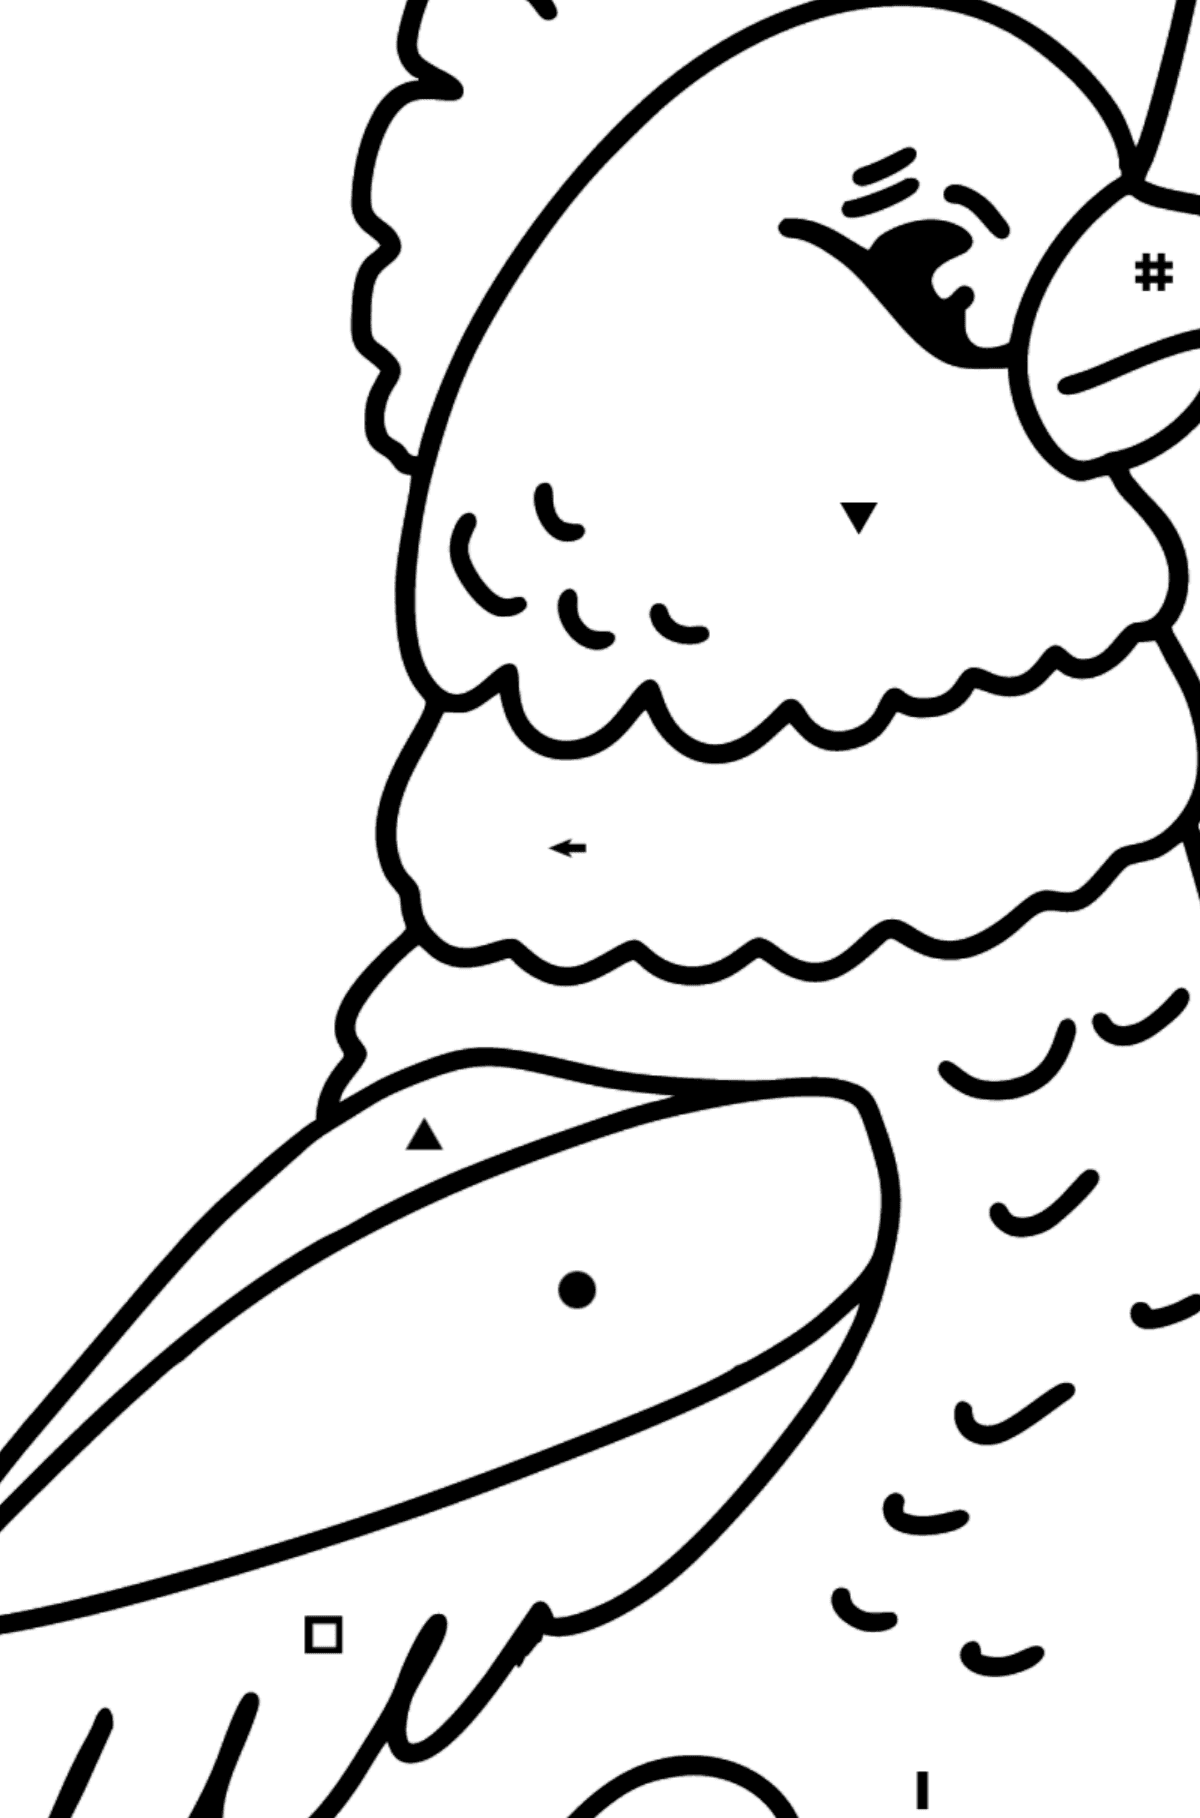 Cockatoo coloring page - Coloring by Symbols for Kids